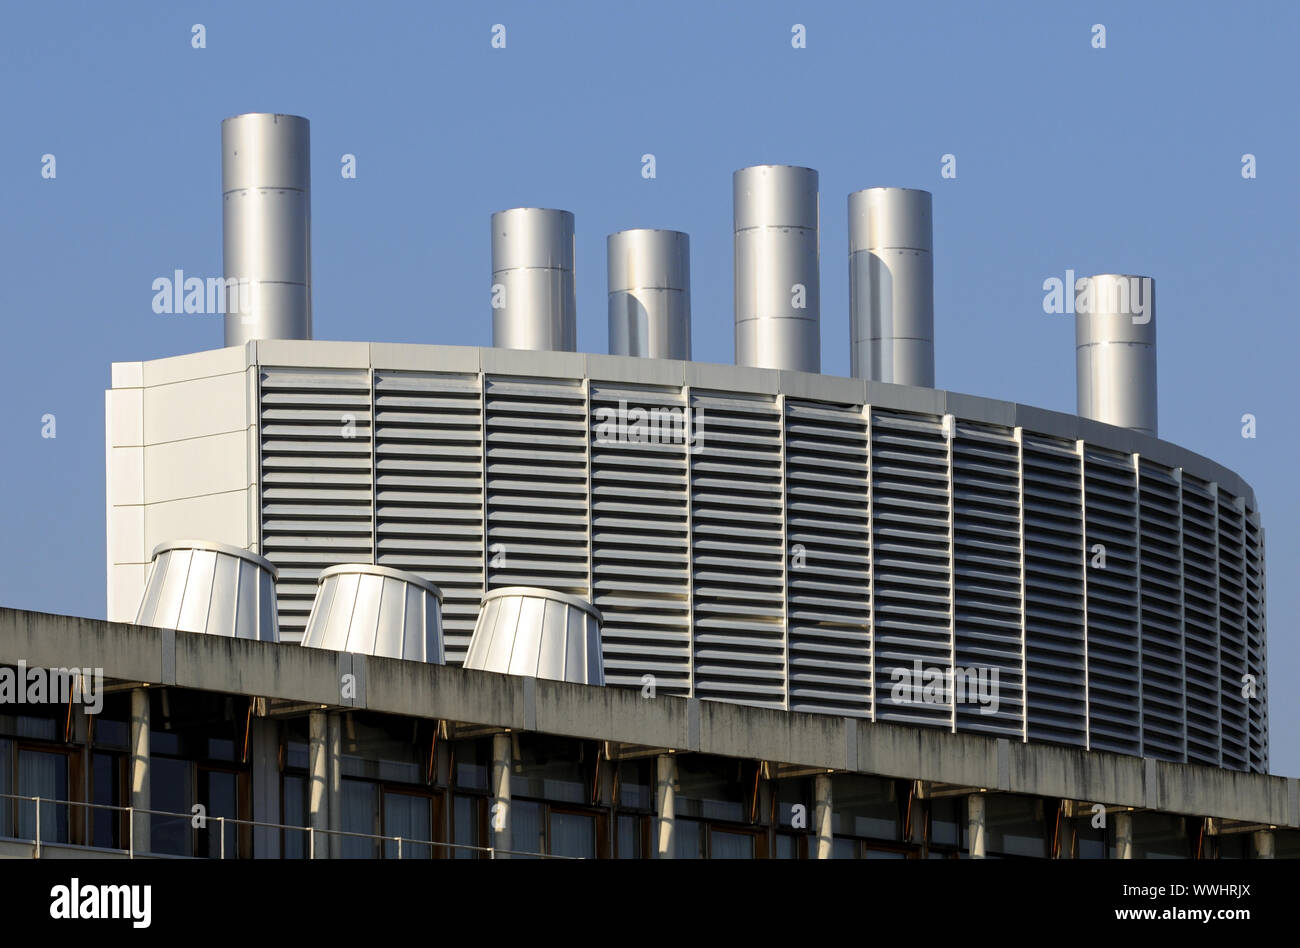 industrial architecture Stock Photo